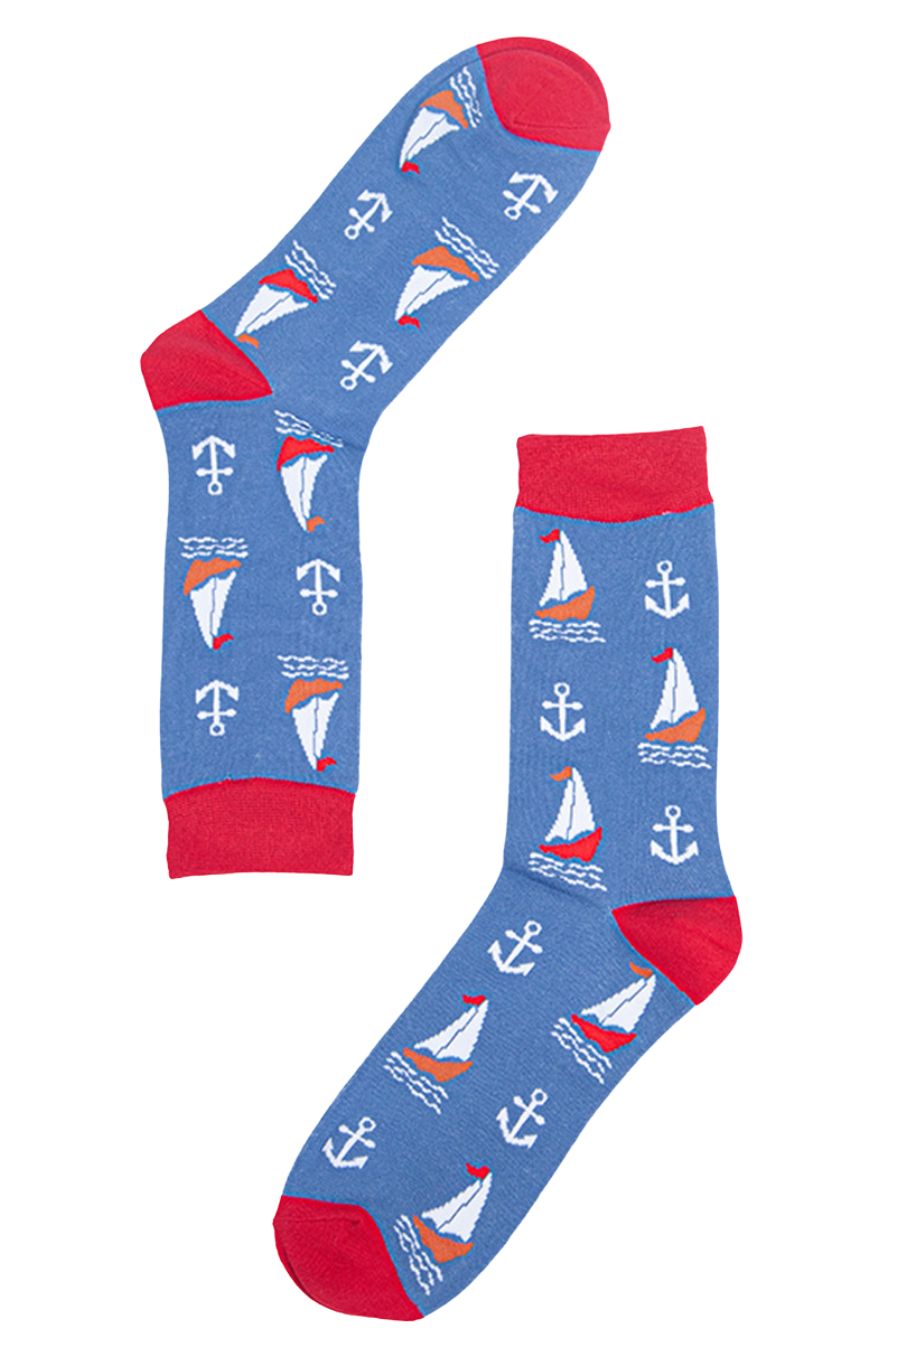 Mens blue and red bamboo socks lying flat. They are patterned with sail boats and anchors. 